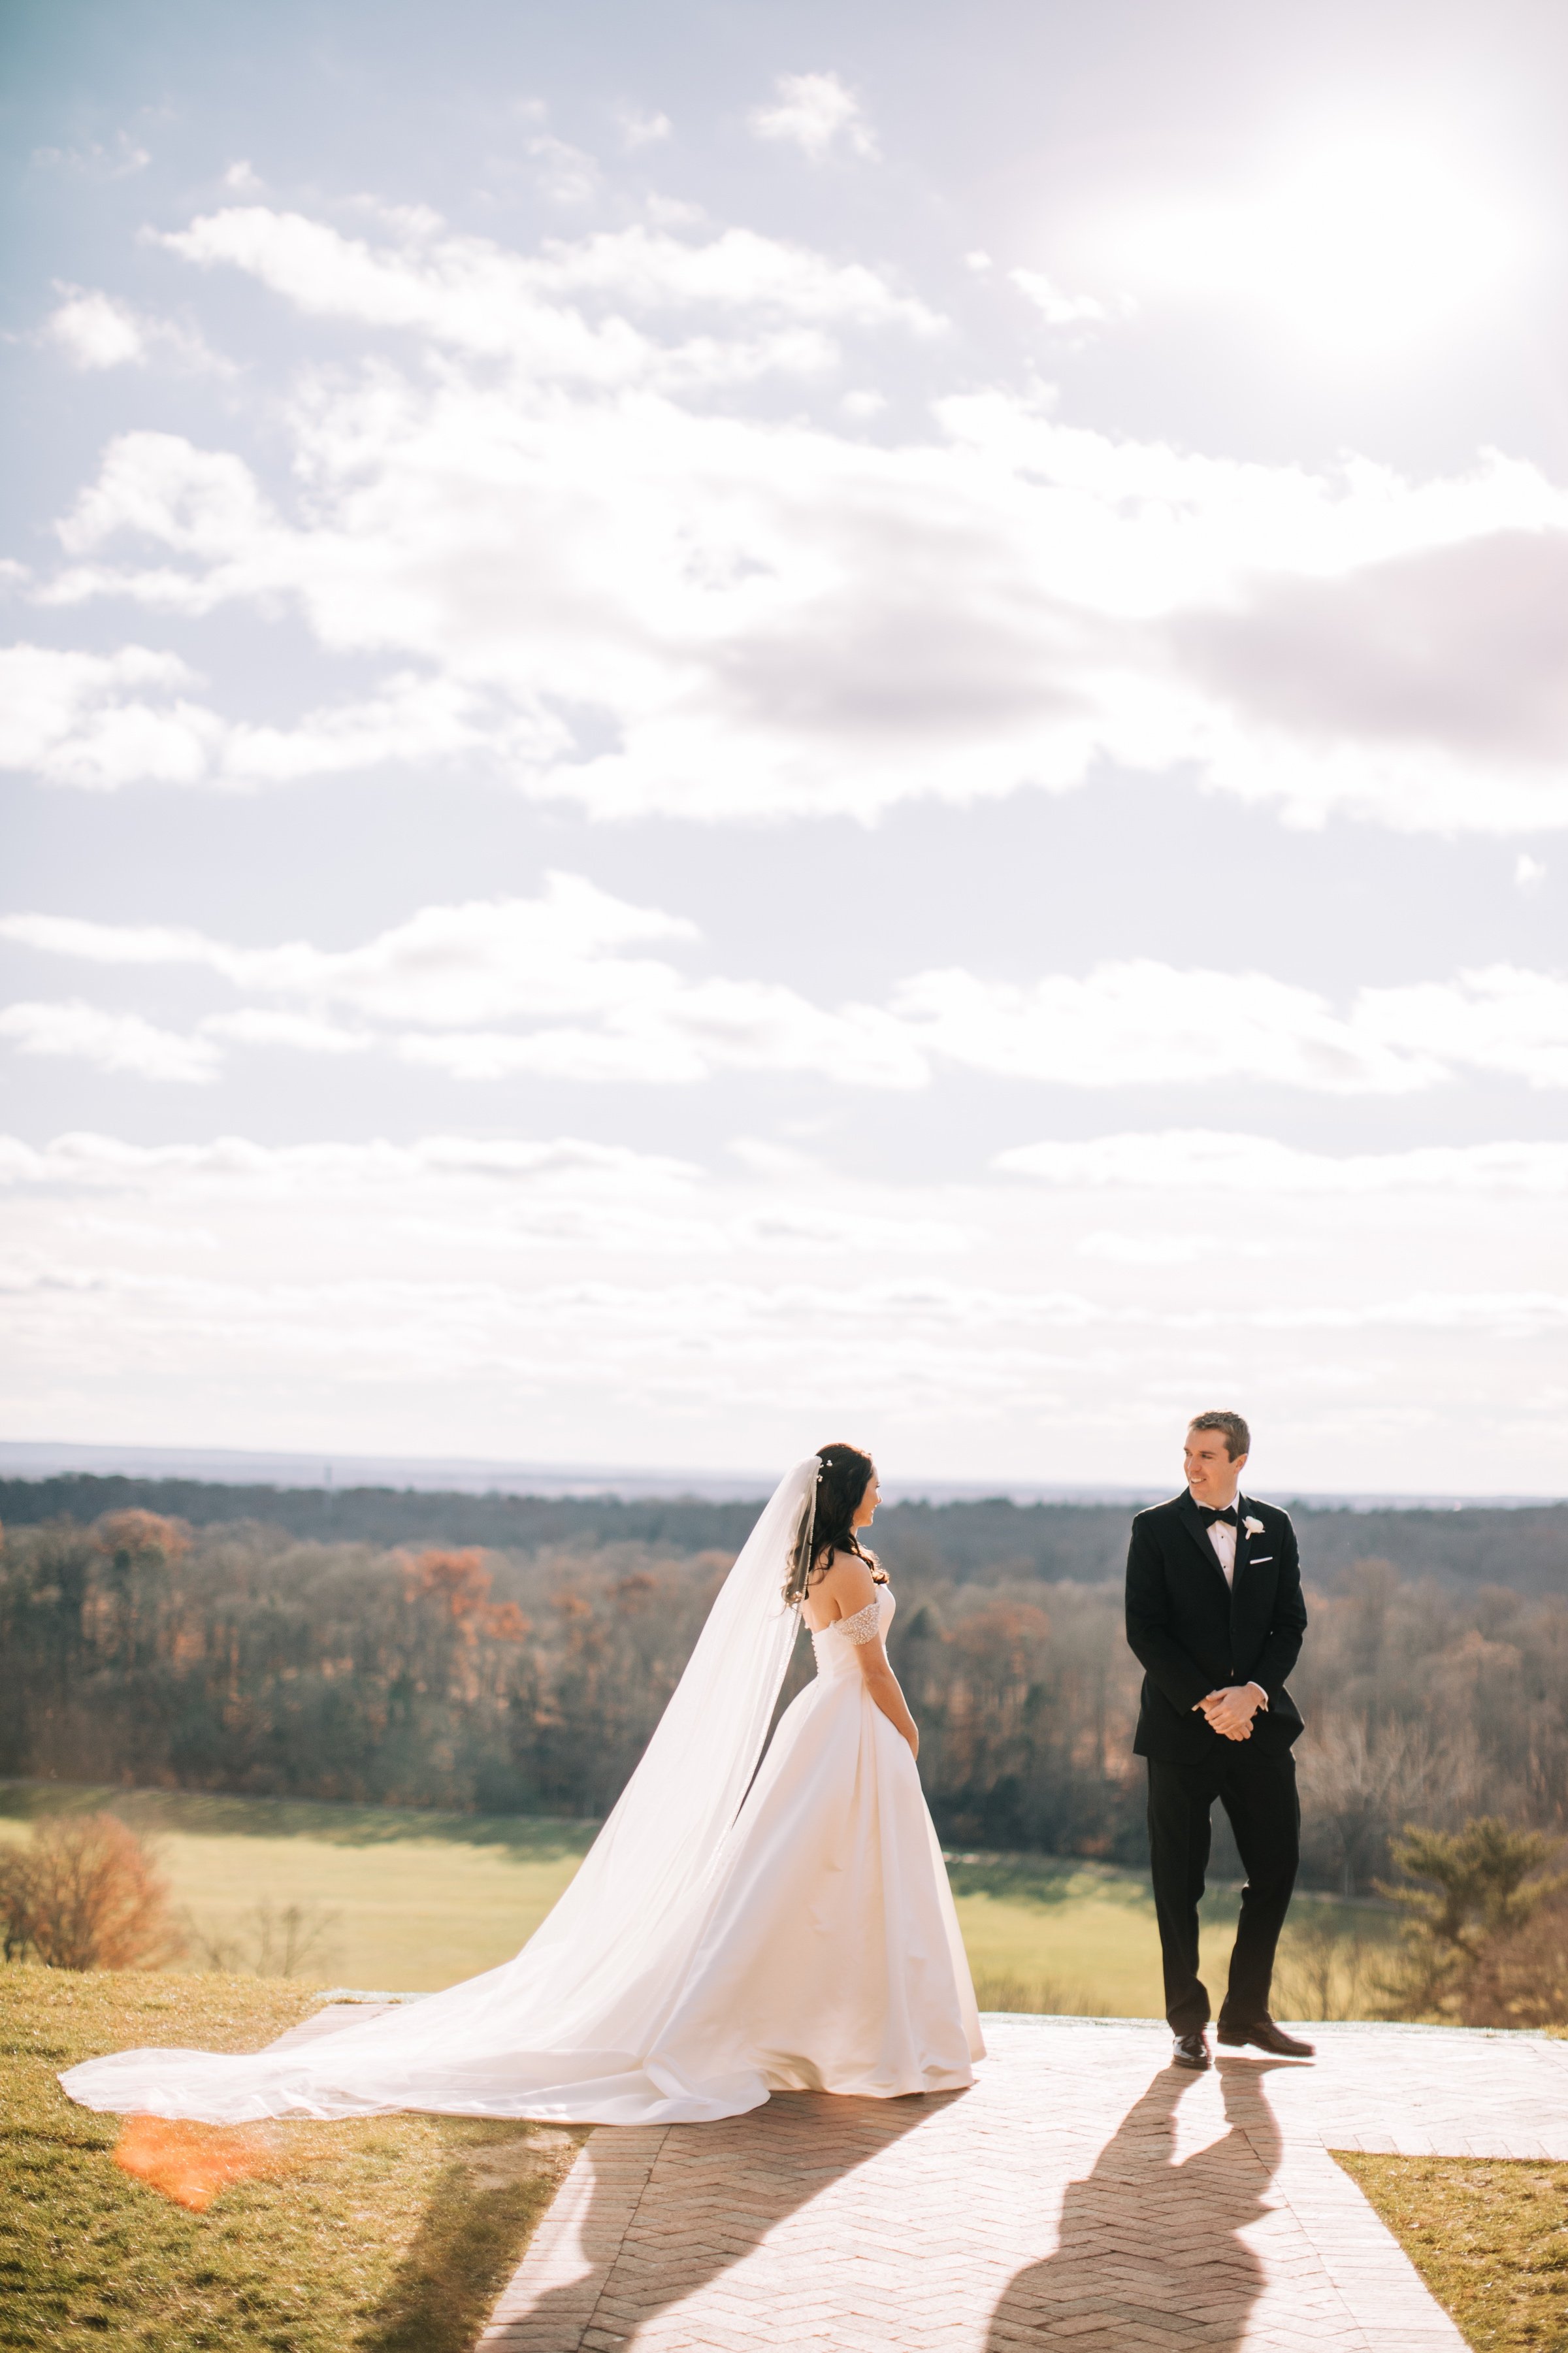 21_bride and groom first look new jersey mansion wedding.jpg